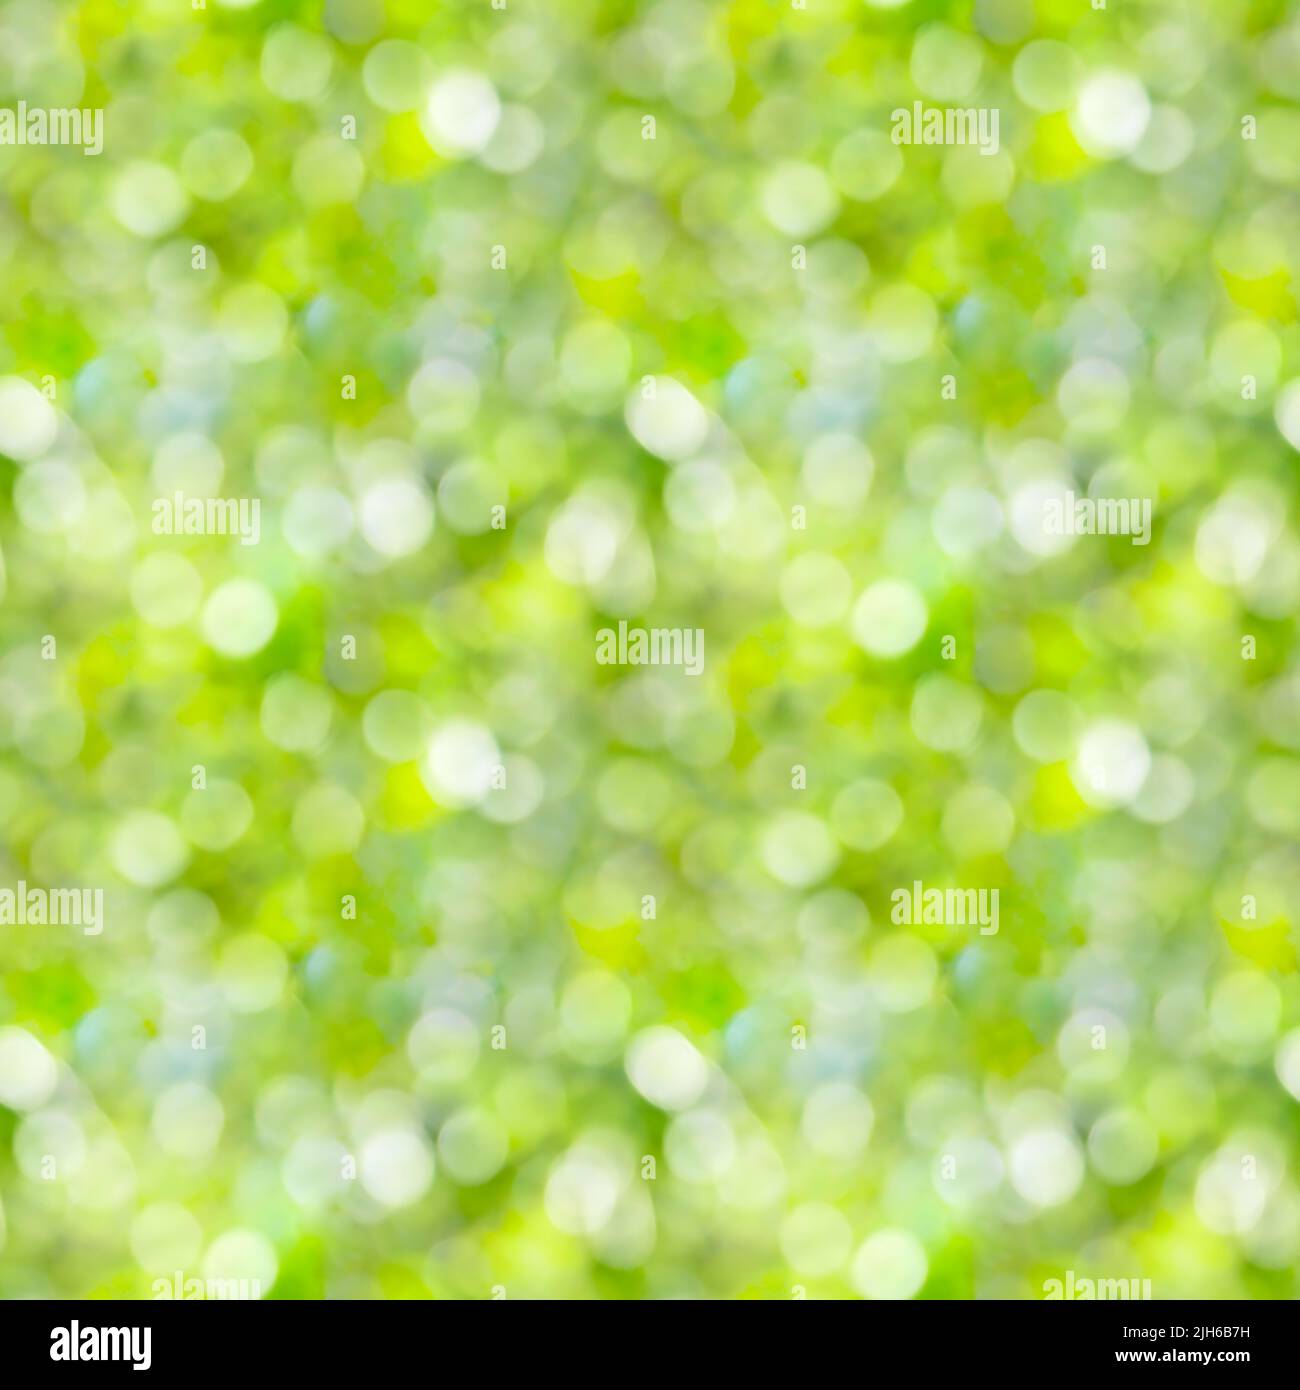 Seamless pattern. Green blurred background with sun rays. Natural texture Stock Photo